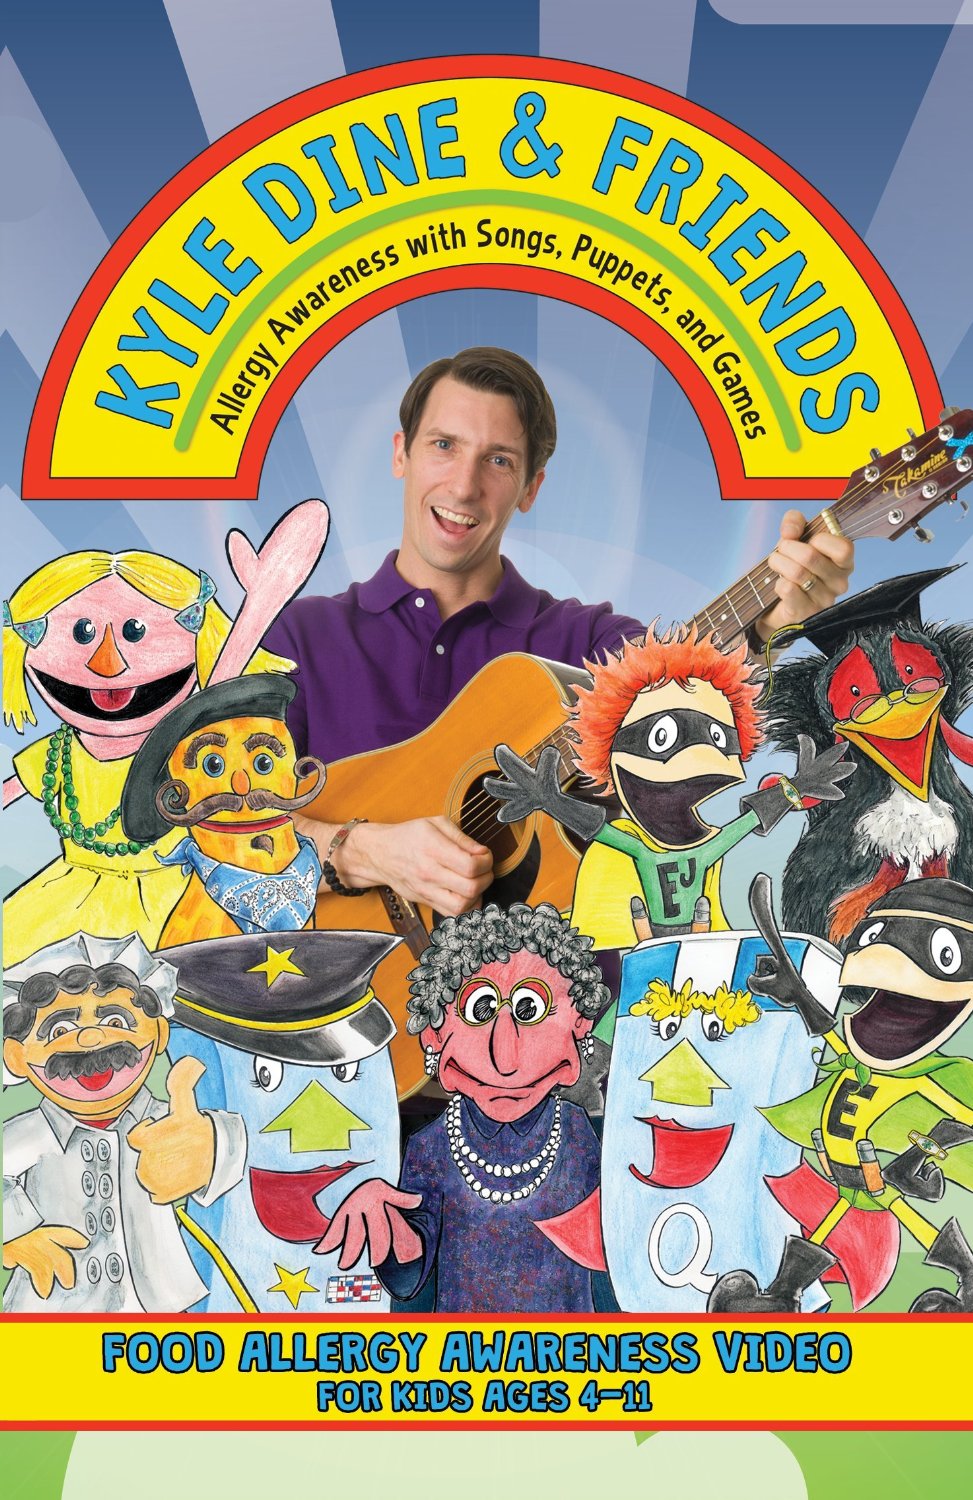 Kyle Dine & Friends: Allergy Awareness with Songs, Puppets, and Games